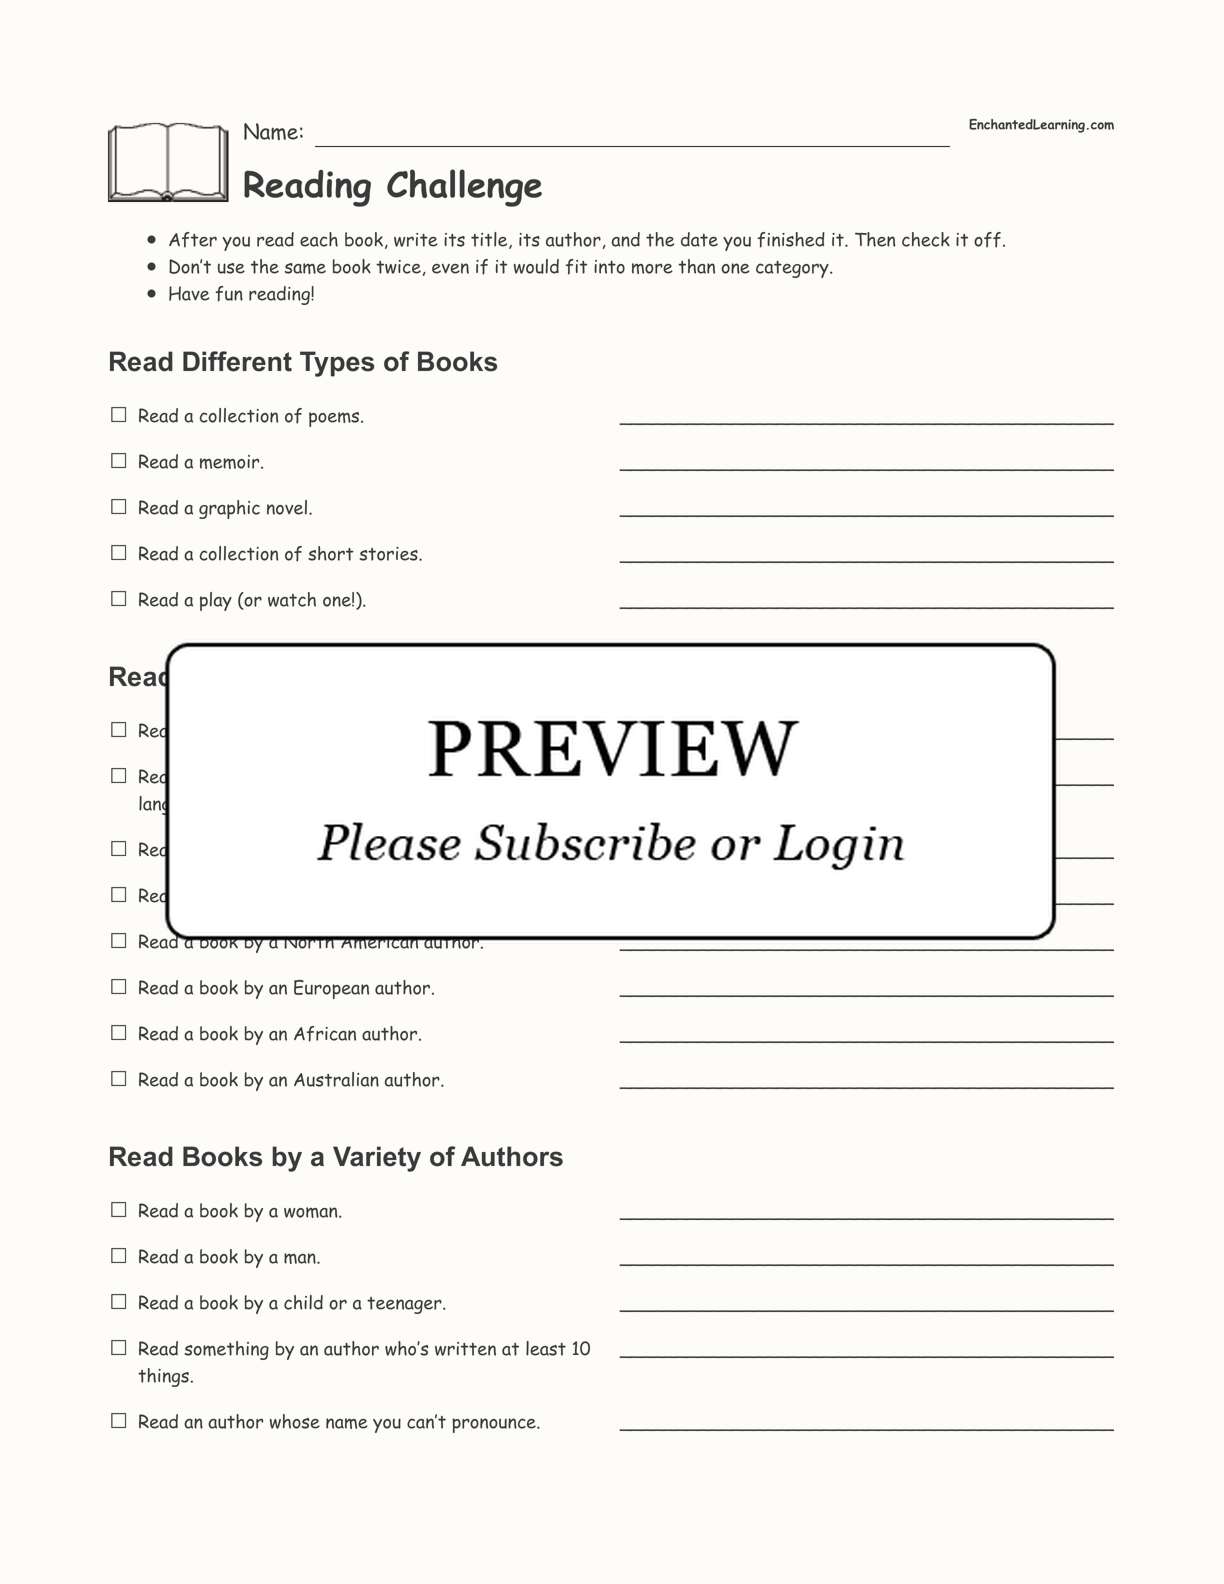 Reading Challenge interactive printout page 1